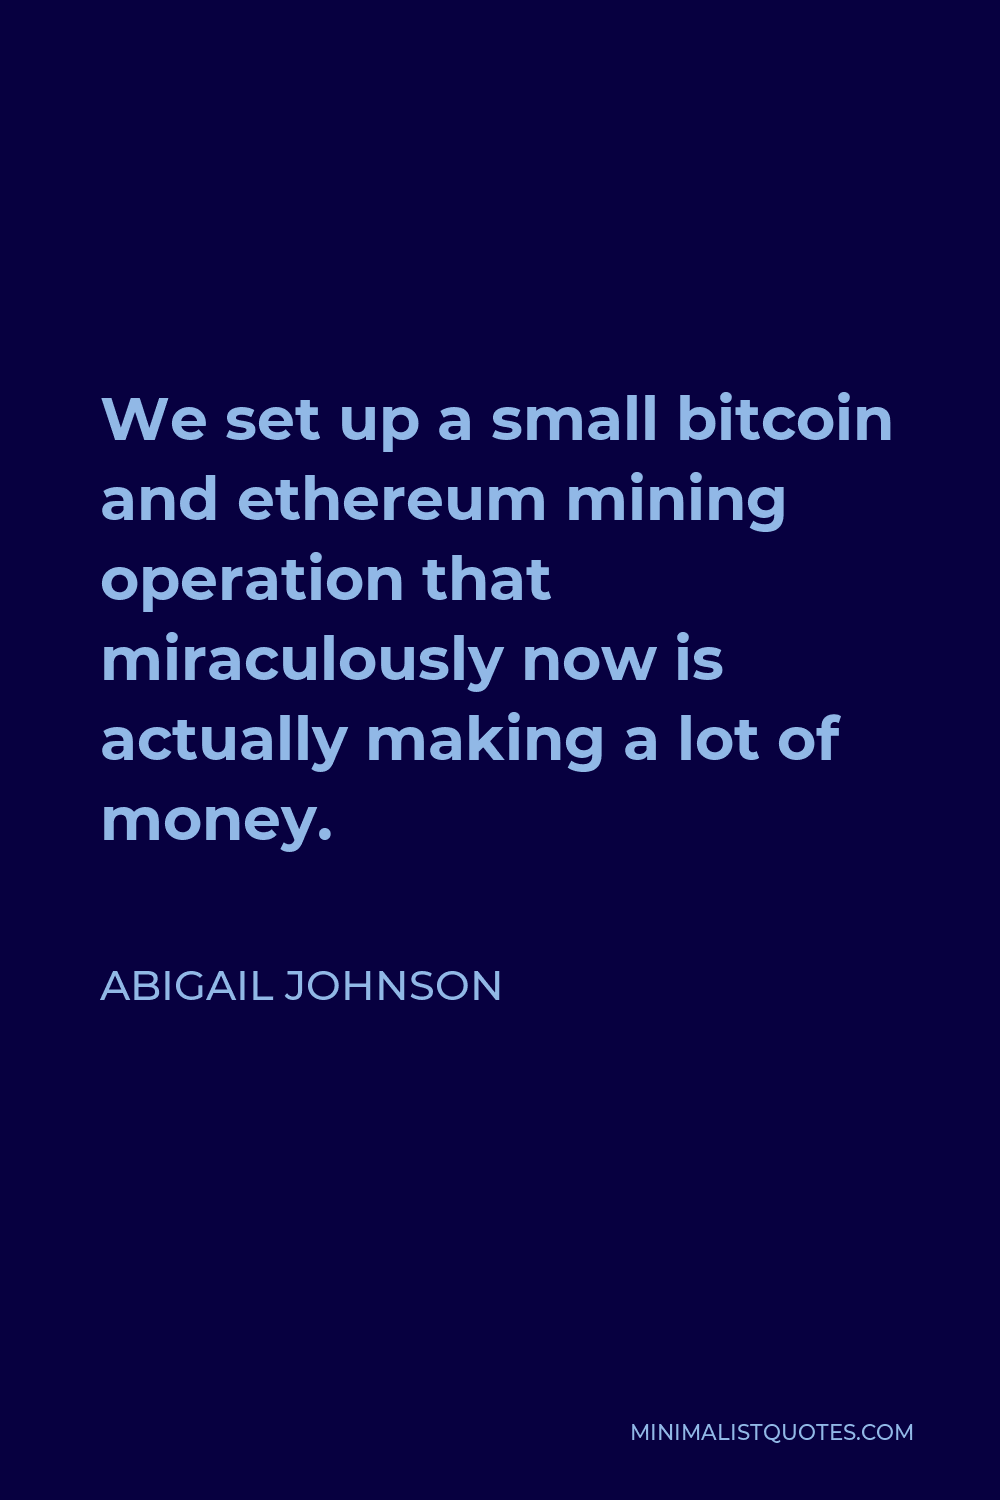 Abigail Johnson Quote - We set up a small bitcoin and ethereum mining operation that miraculously now is actually making a lot of money.